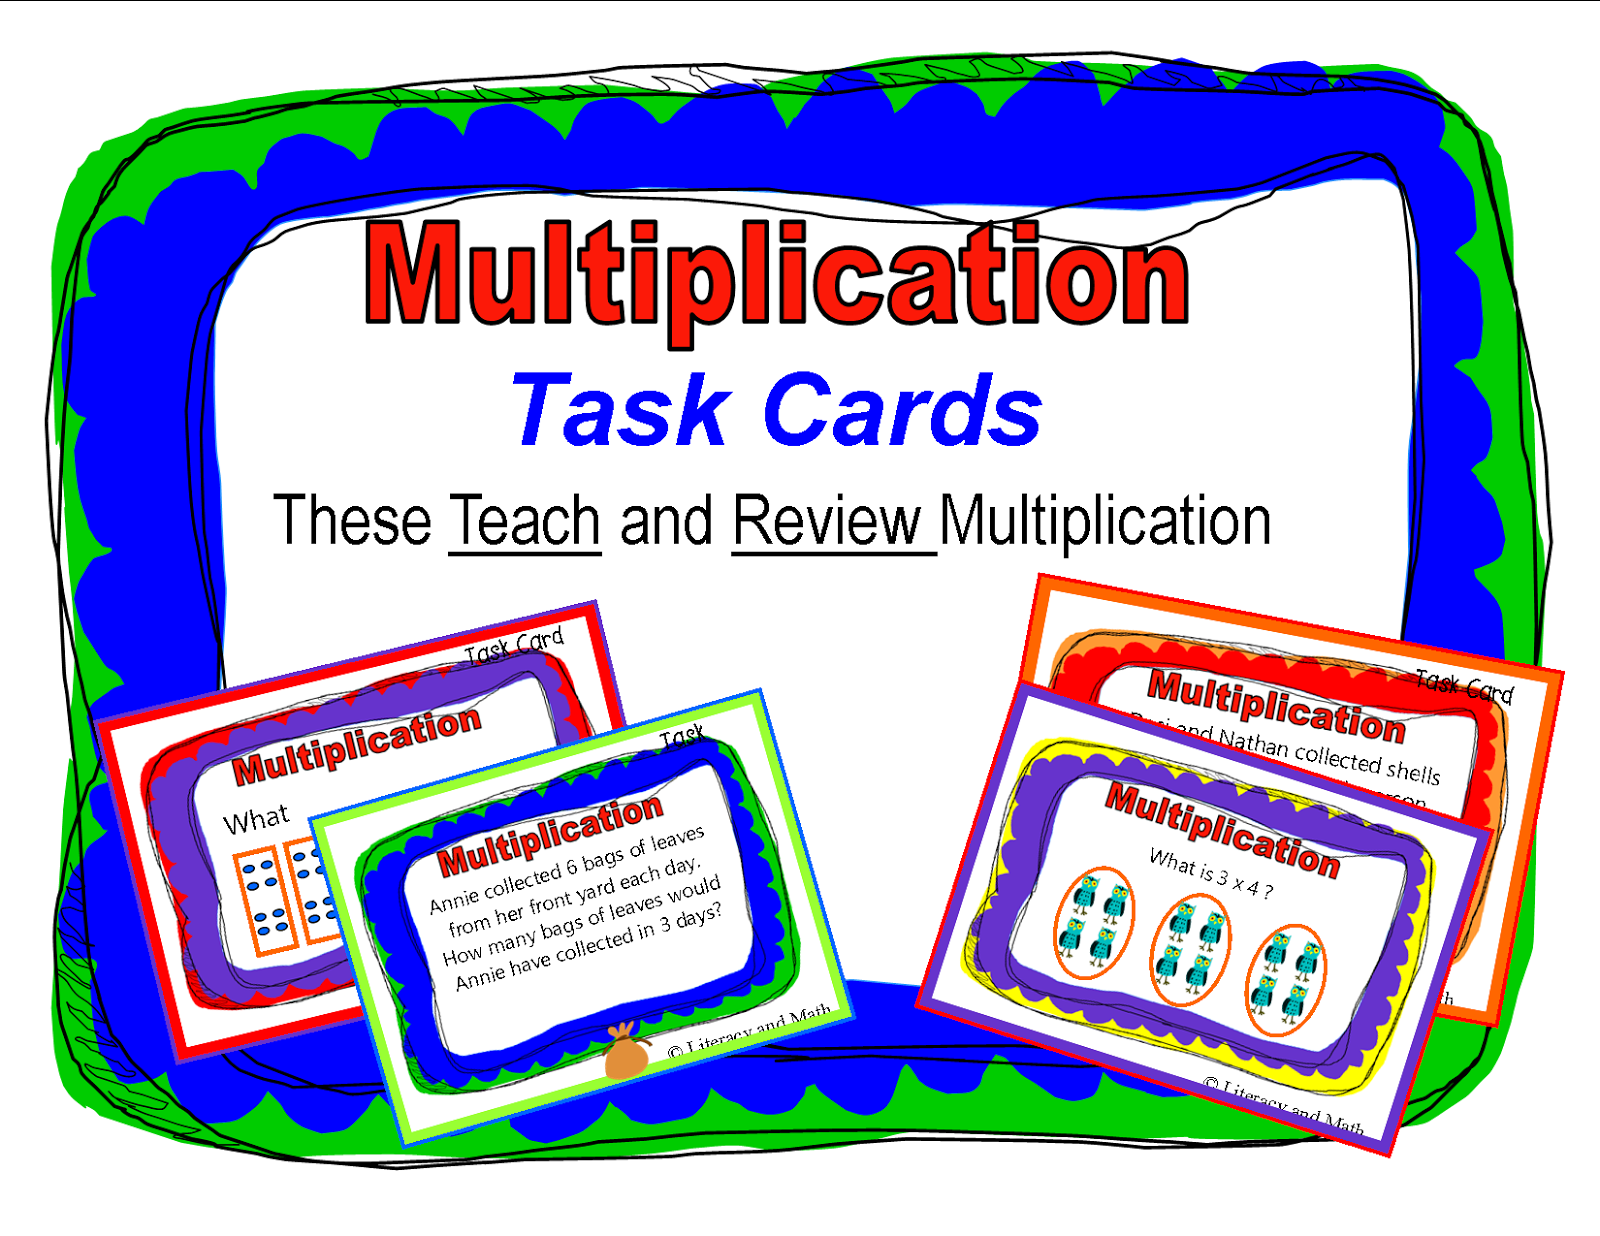 Taught meaning. Multiplication Window Card. School Multiplication. Math Multiplication Certificate. Task Card.